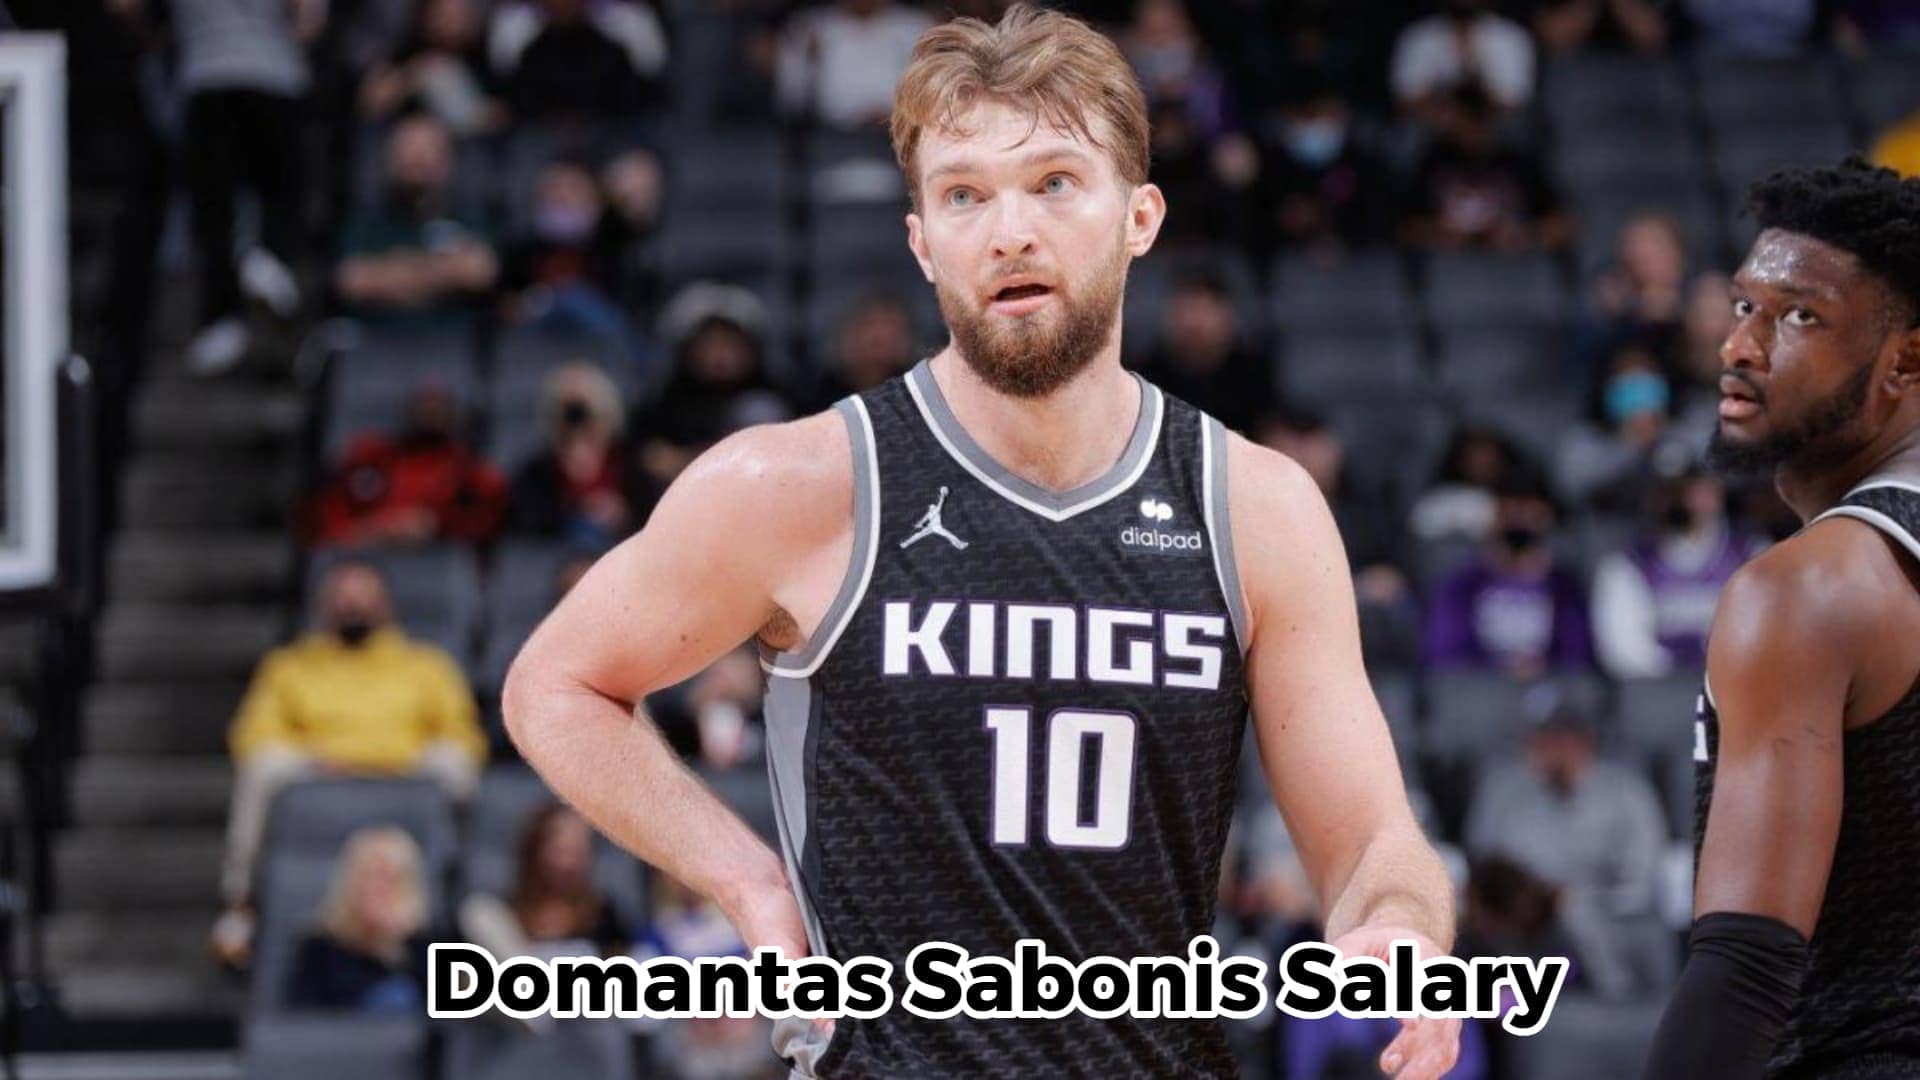 How much is Domantas Sabonis Salary? 